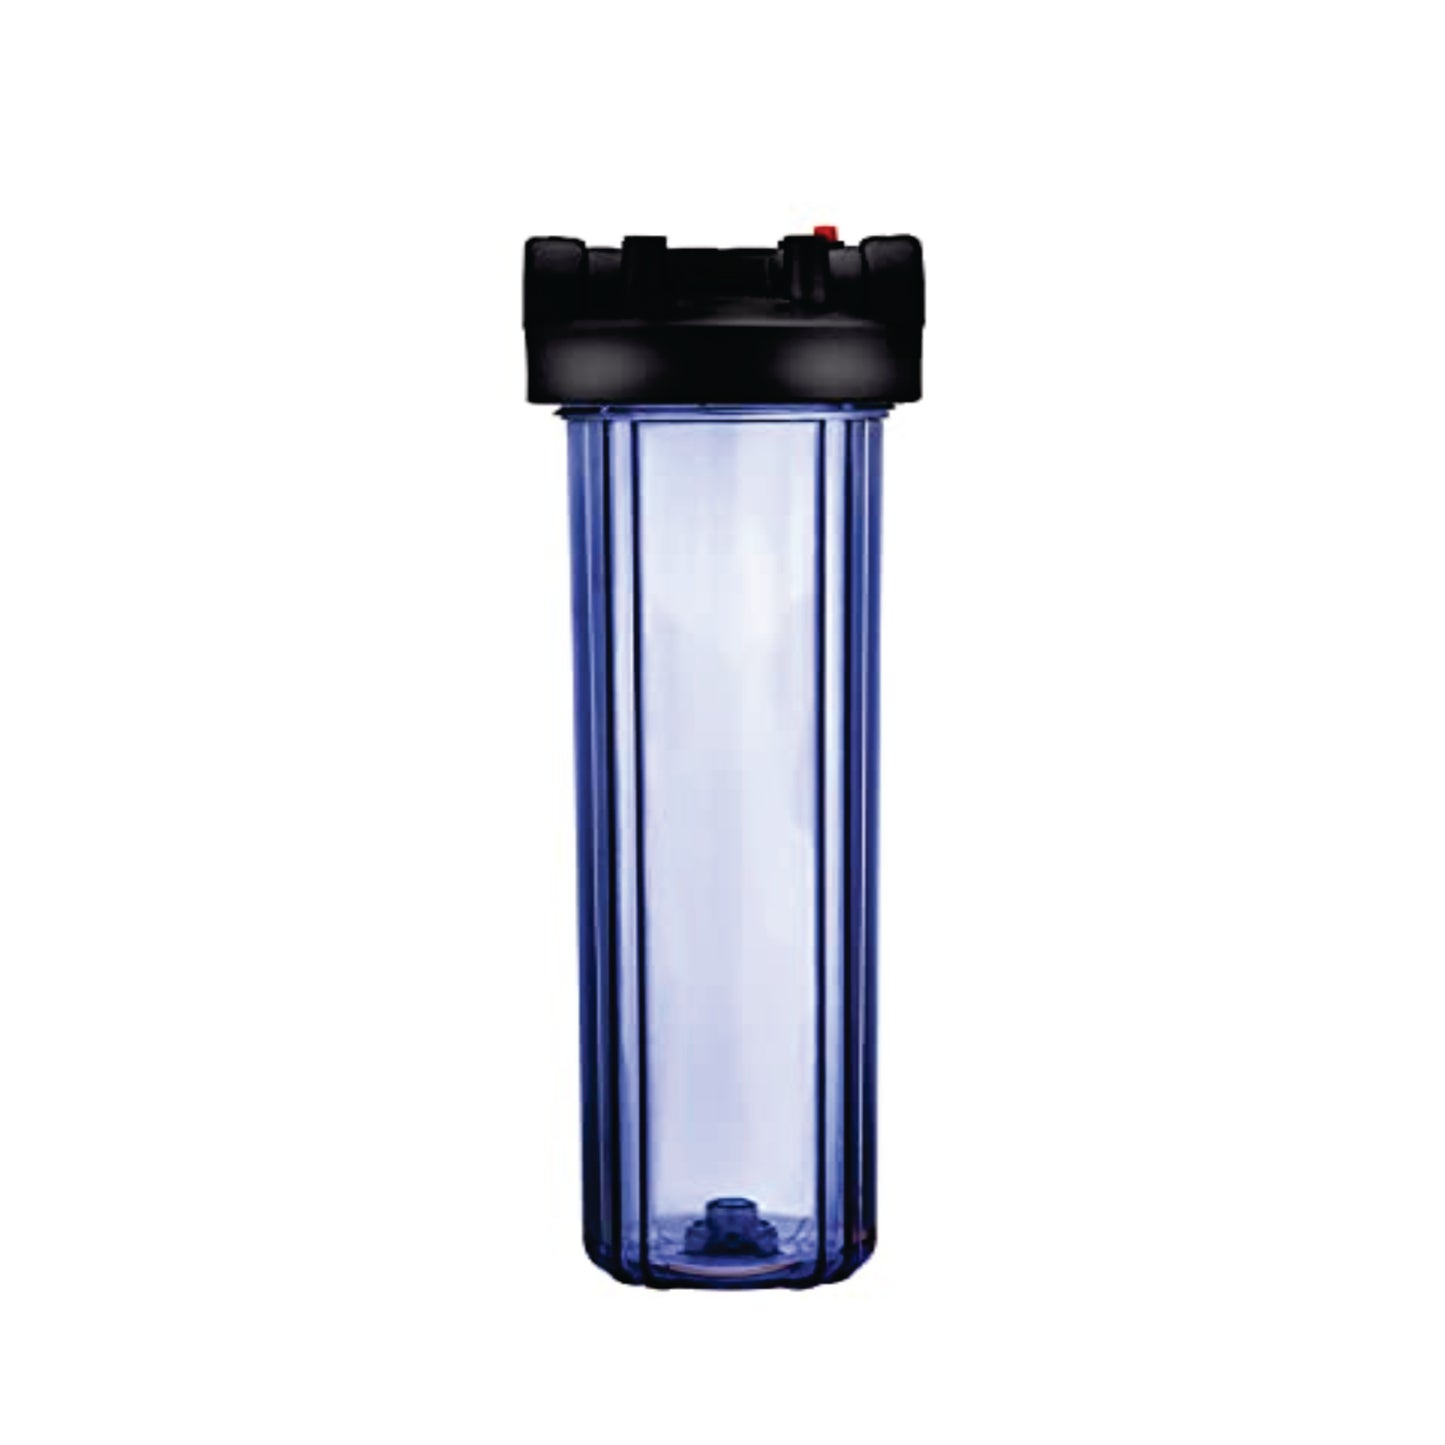 Water Filtration - Housing - Plastic Port Clear